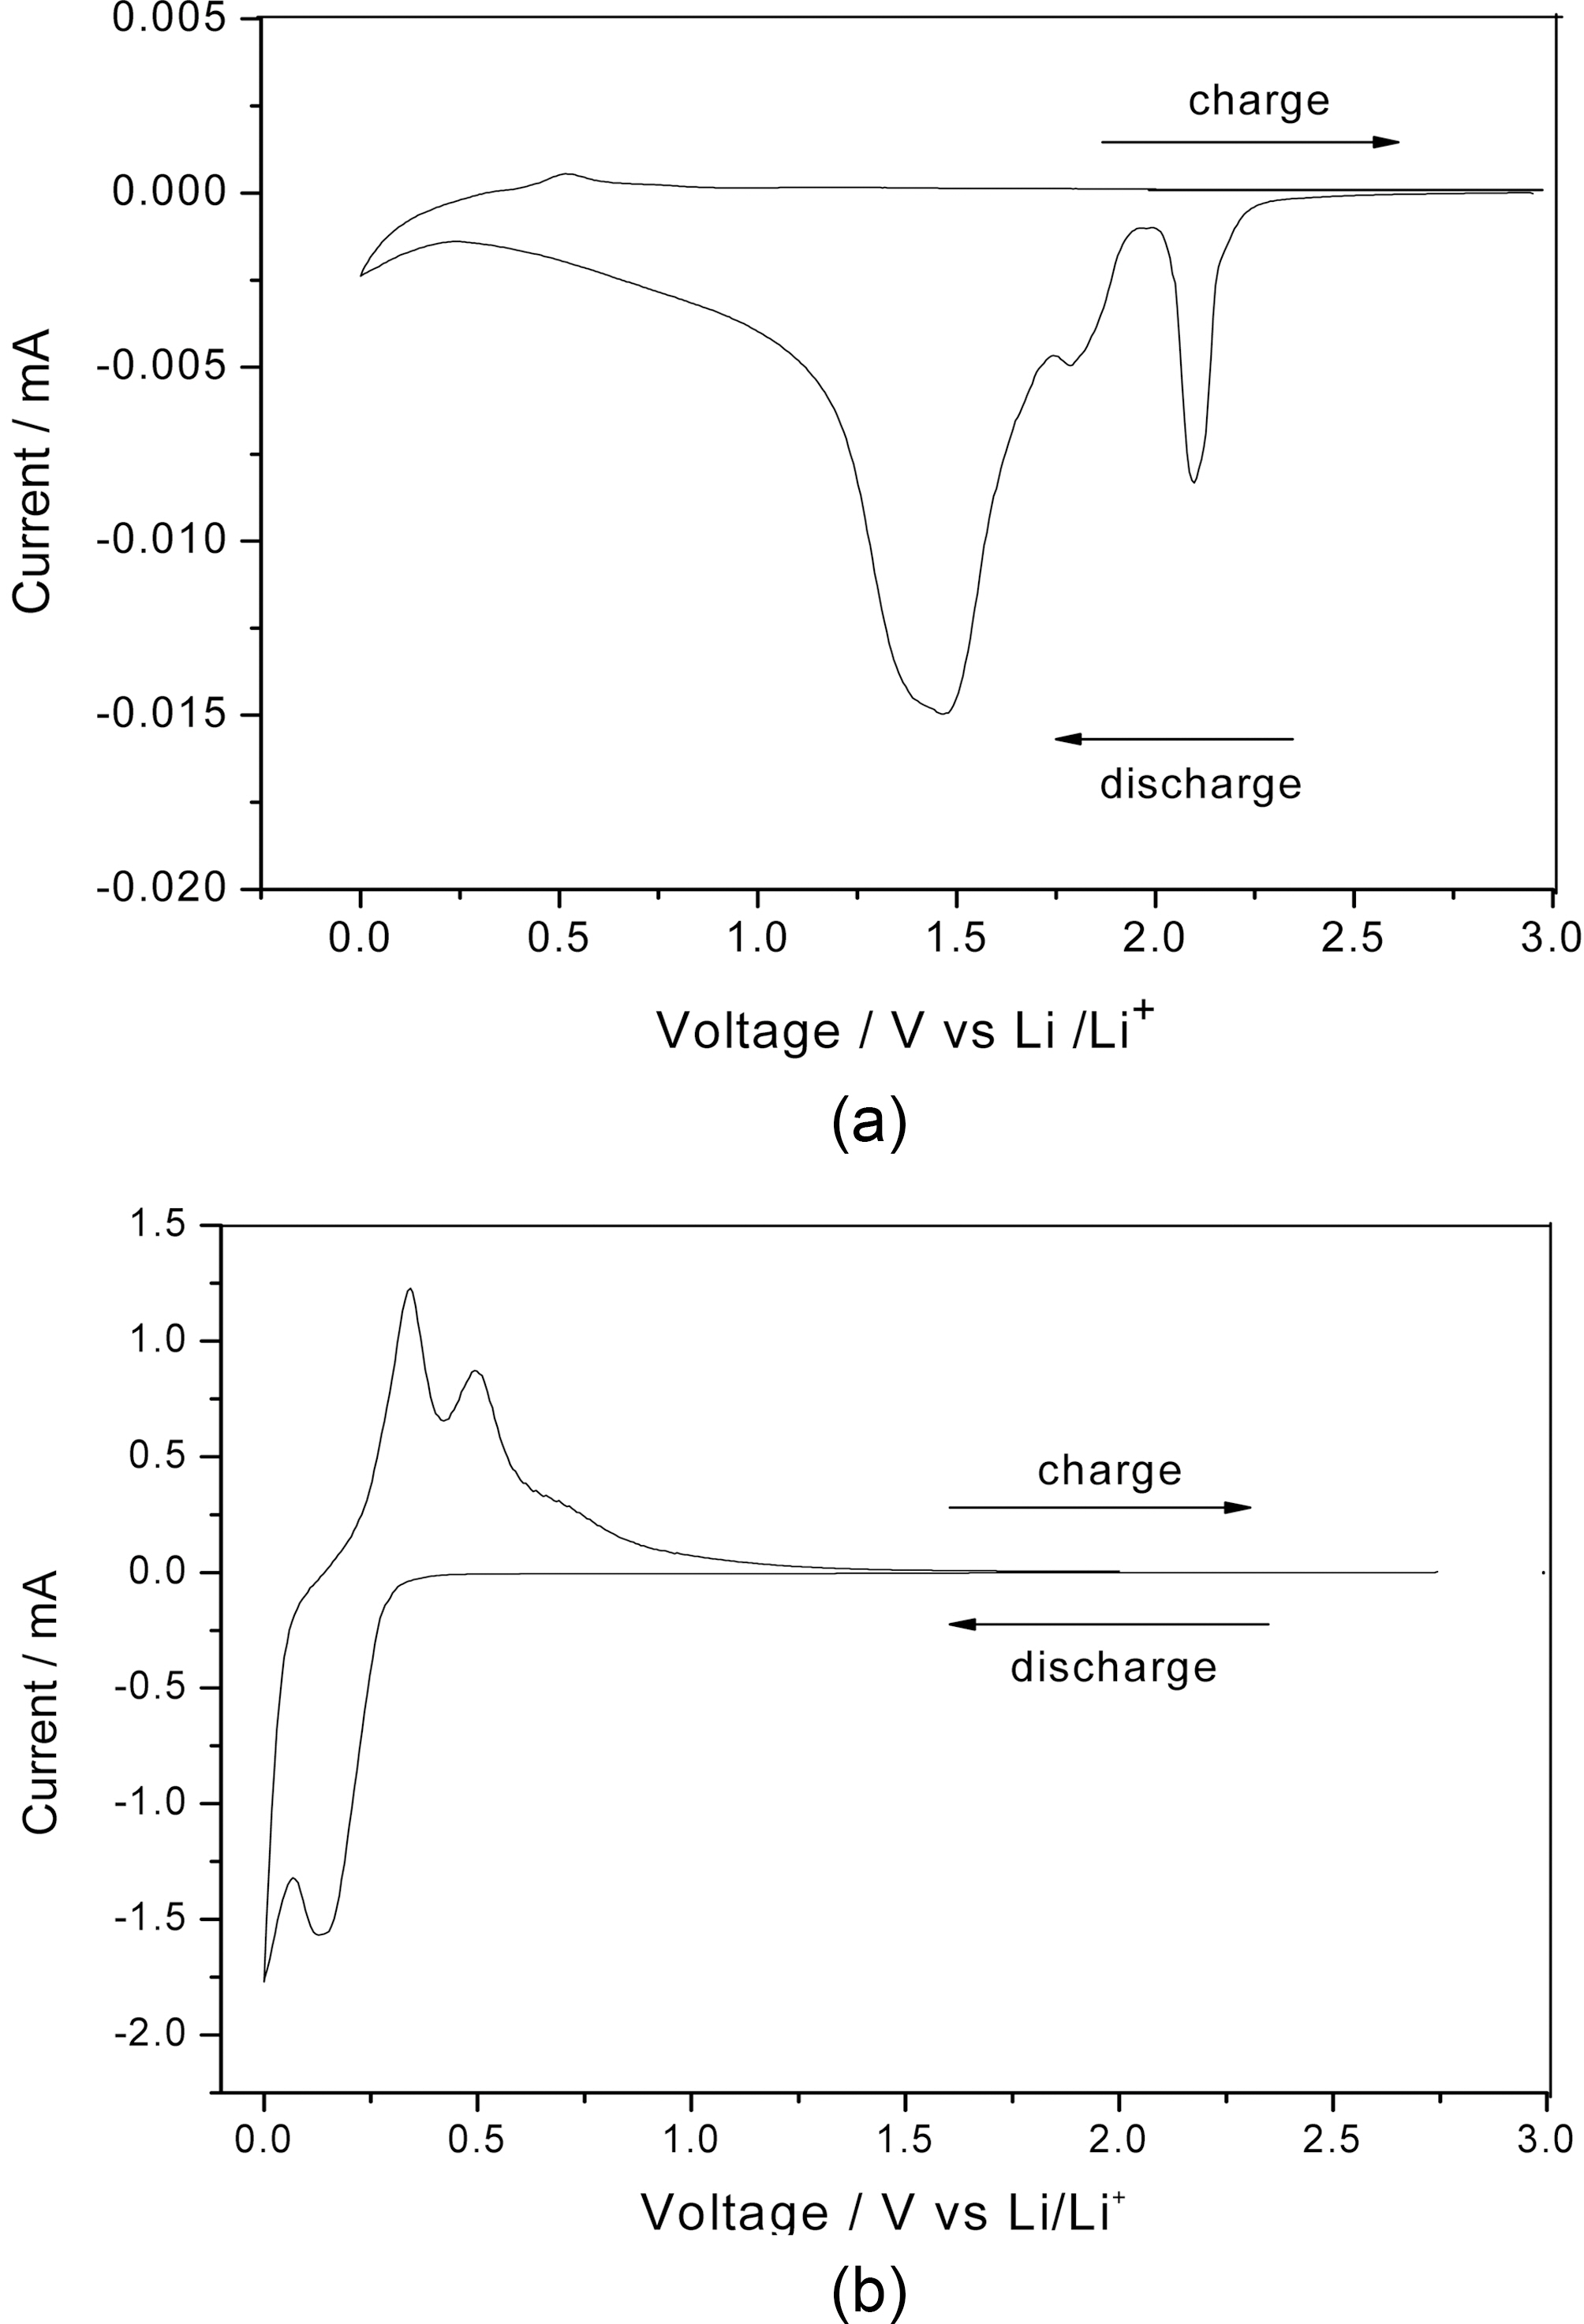 Cyclic voltammetry curves of the (a) pristine coated Si and (b) B:C60 coated Si electrodes at the first cycle under scan rate of 0.05 mVs-1 between 0-3 V.